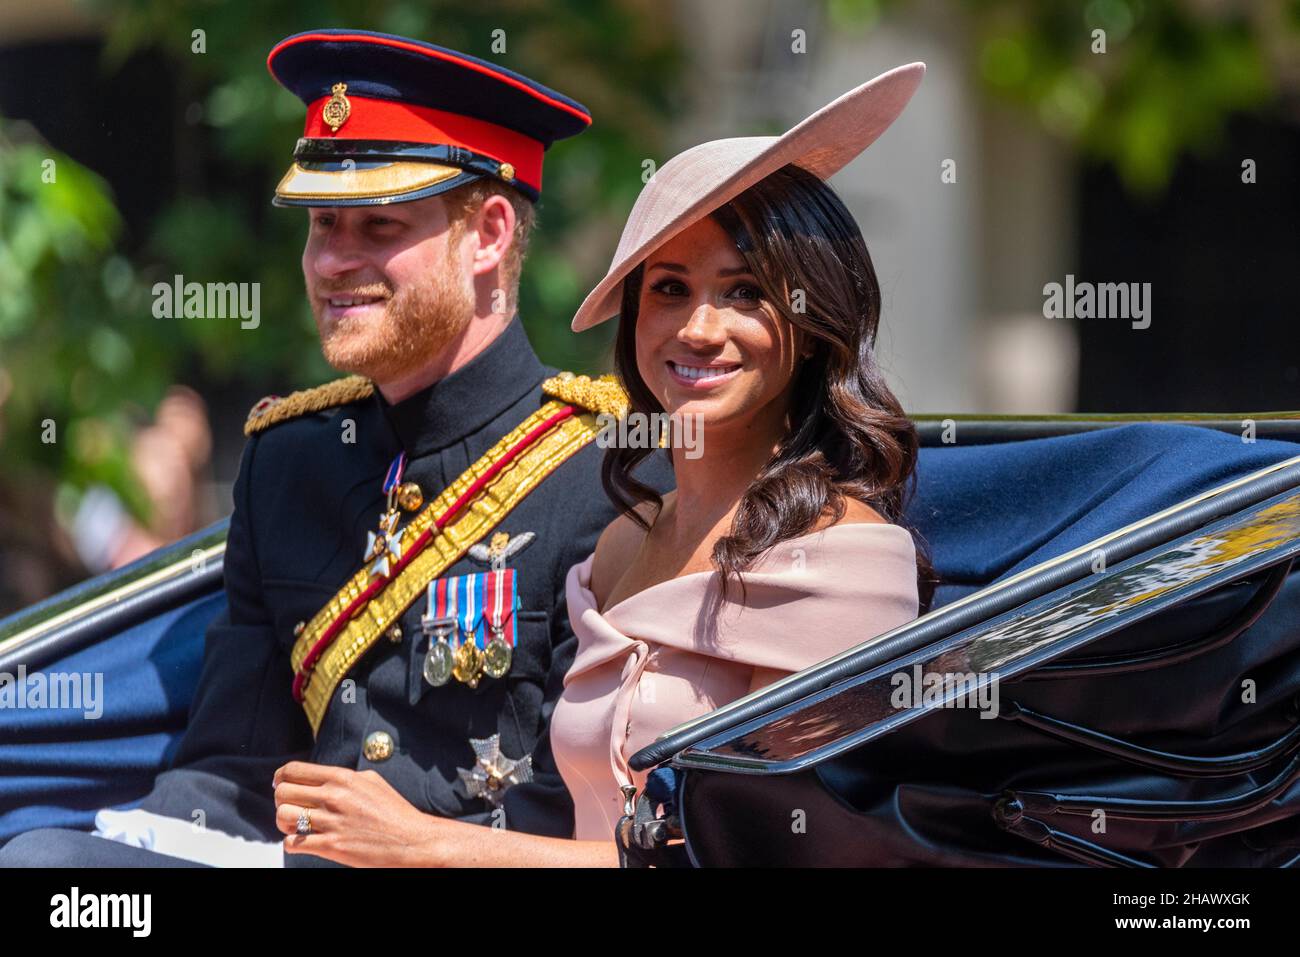 Meghan Markle, Duchess of Sussex, and Prince Harry, Duke of Sussex in carriage on The Mall, London, for Trooping the Colour 2018. Fashion outfit Stock Photo